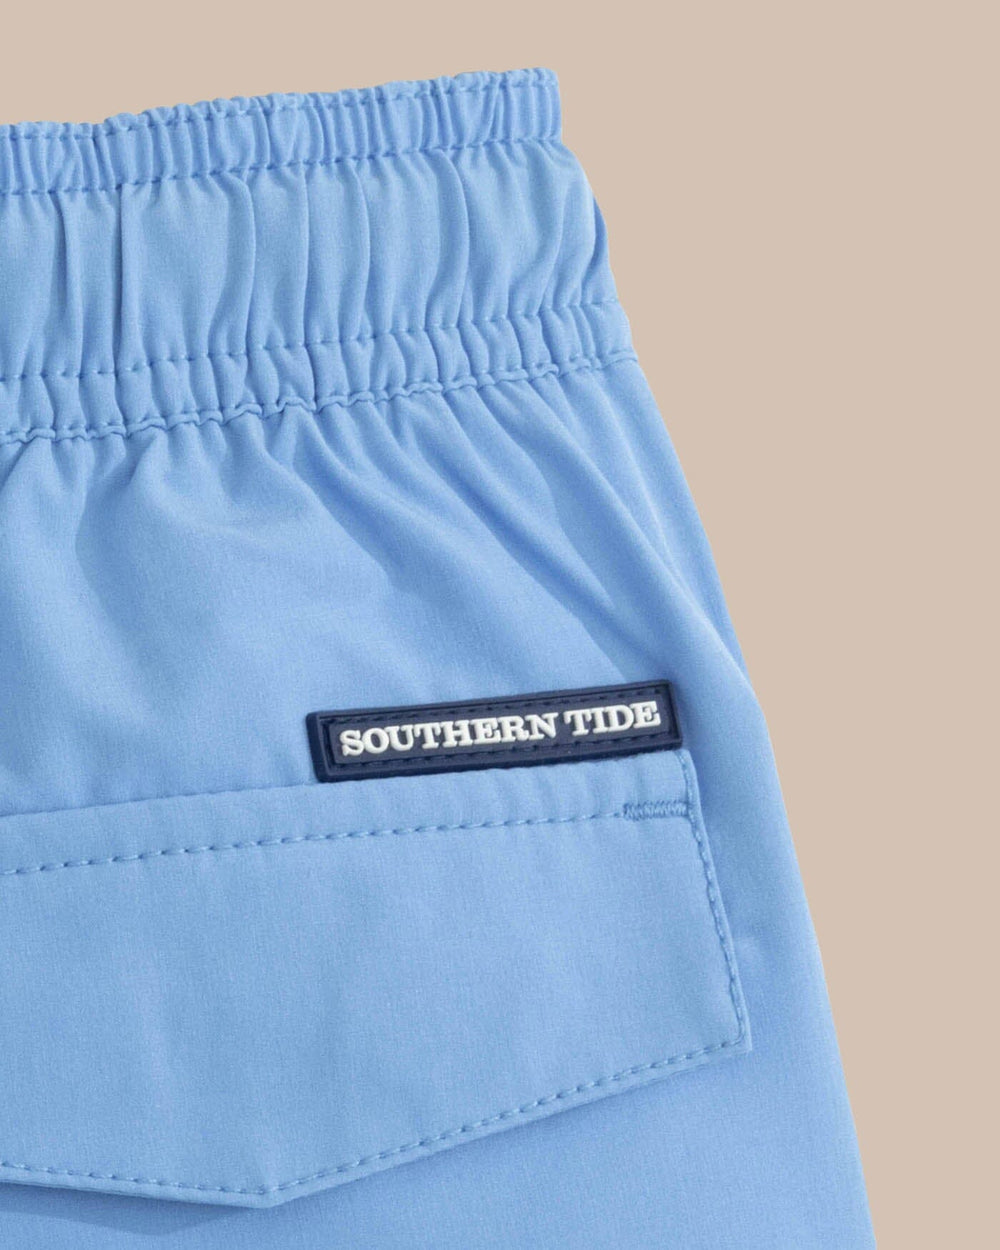 The detail view of the Southern Tide Boys Solid Swim Truck 2 0 by Southern Tide - Ocean Channel